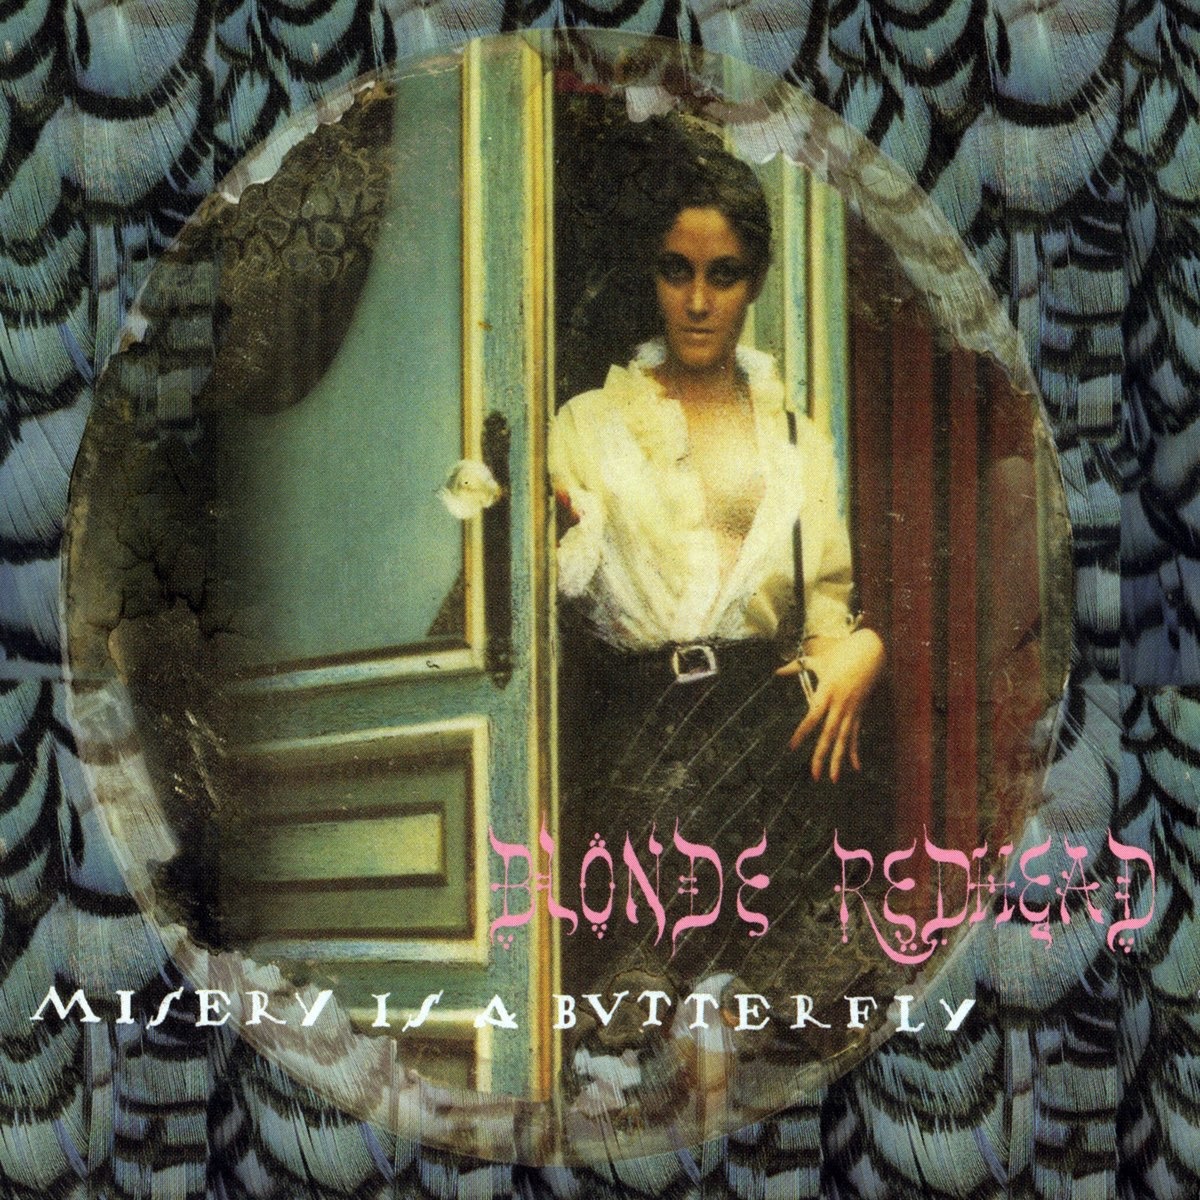 20 years ago today, @BlondeRedhead released “Misery Is A Butterfly” (@4AD_Official). Her heavy wings will warp your mind. Read @whiteliesmusic in MAGNET on #BlondeRedhead: magnetmagazine.com/2011/02/05/whi…